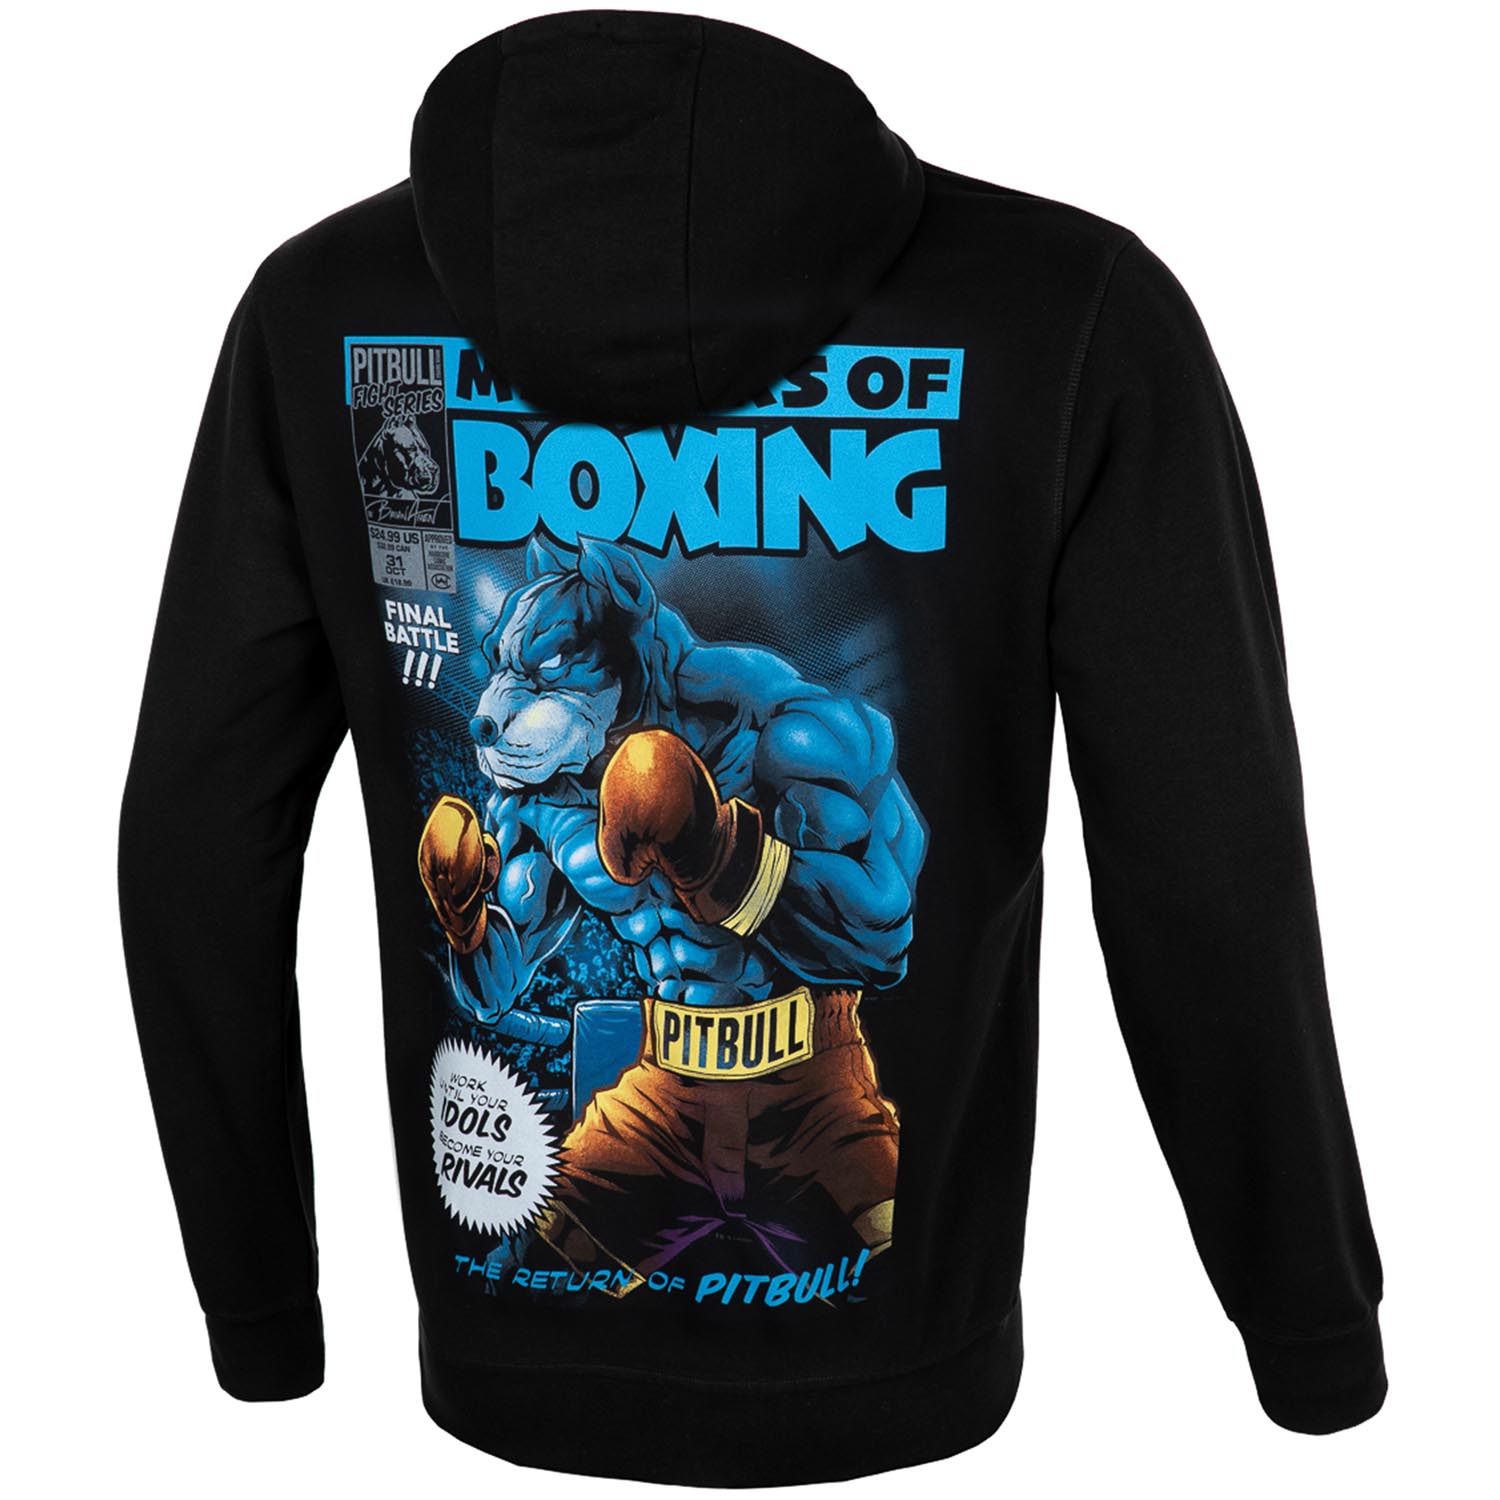 Pit Bull West Coast Hoody, Masters of Boxing, black